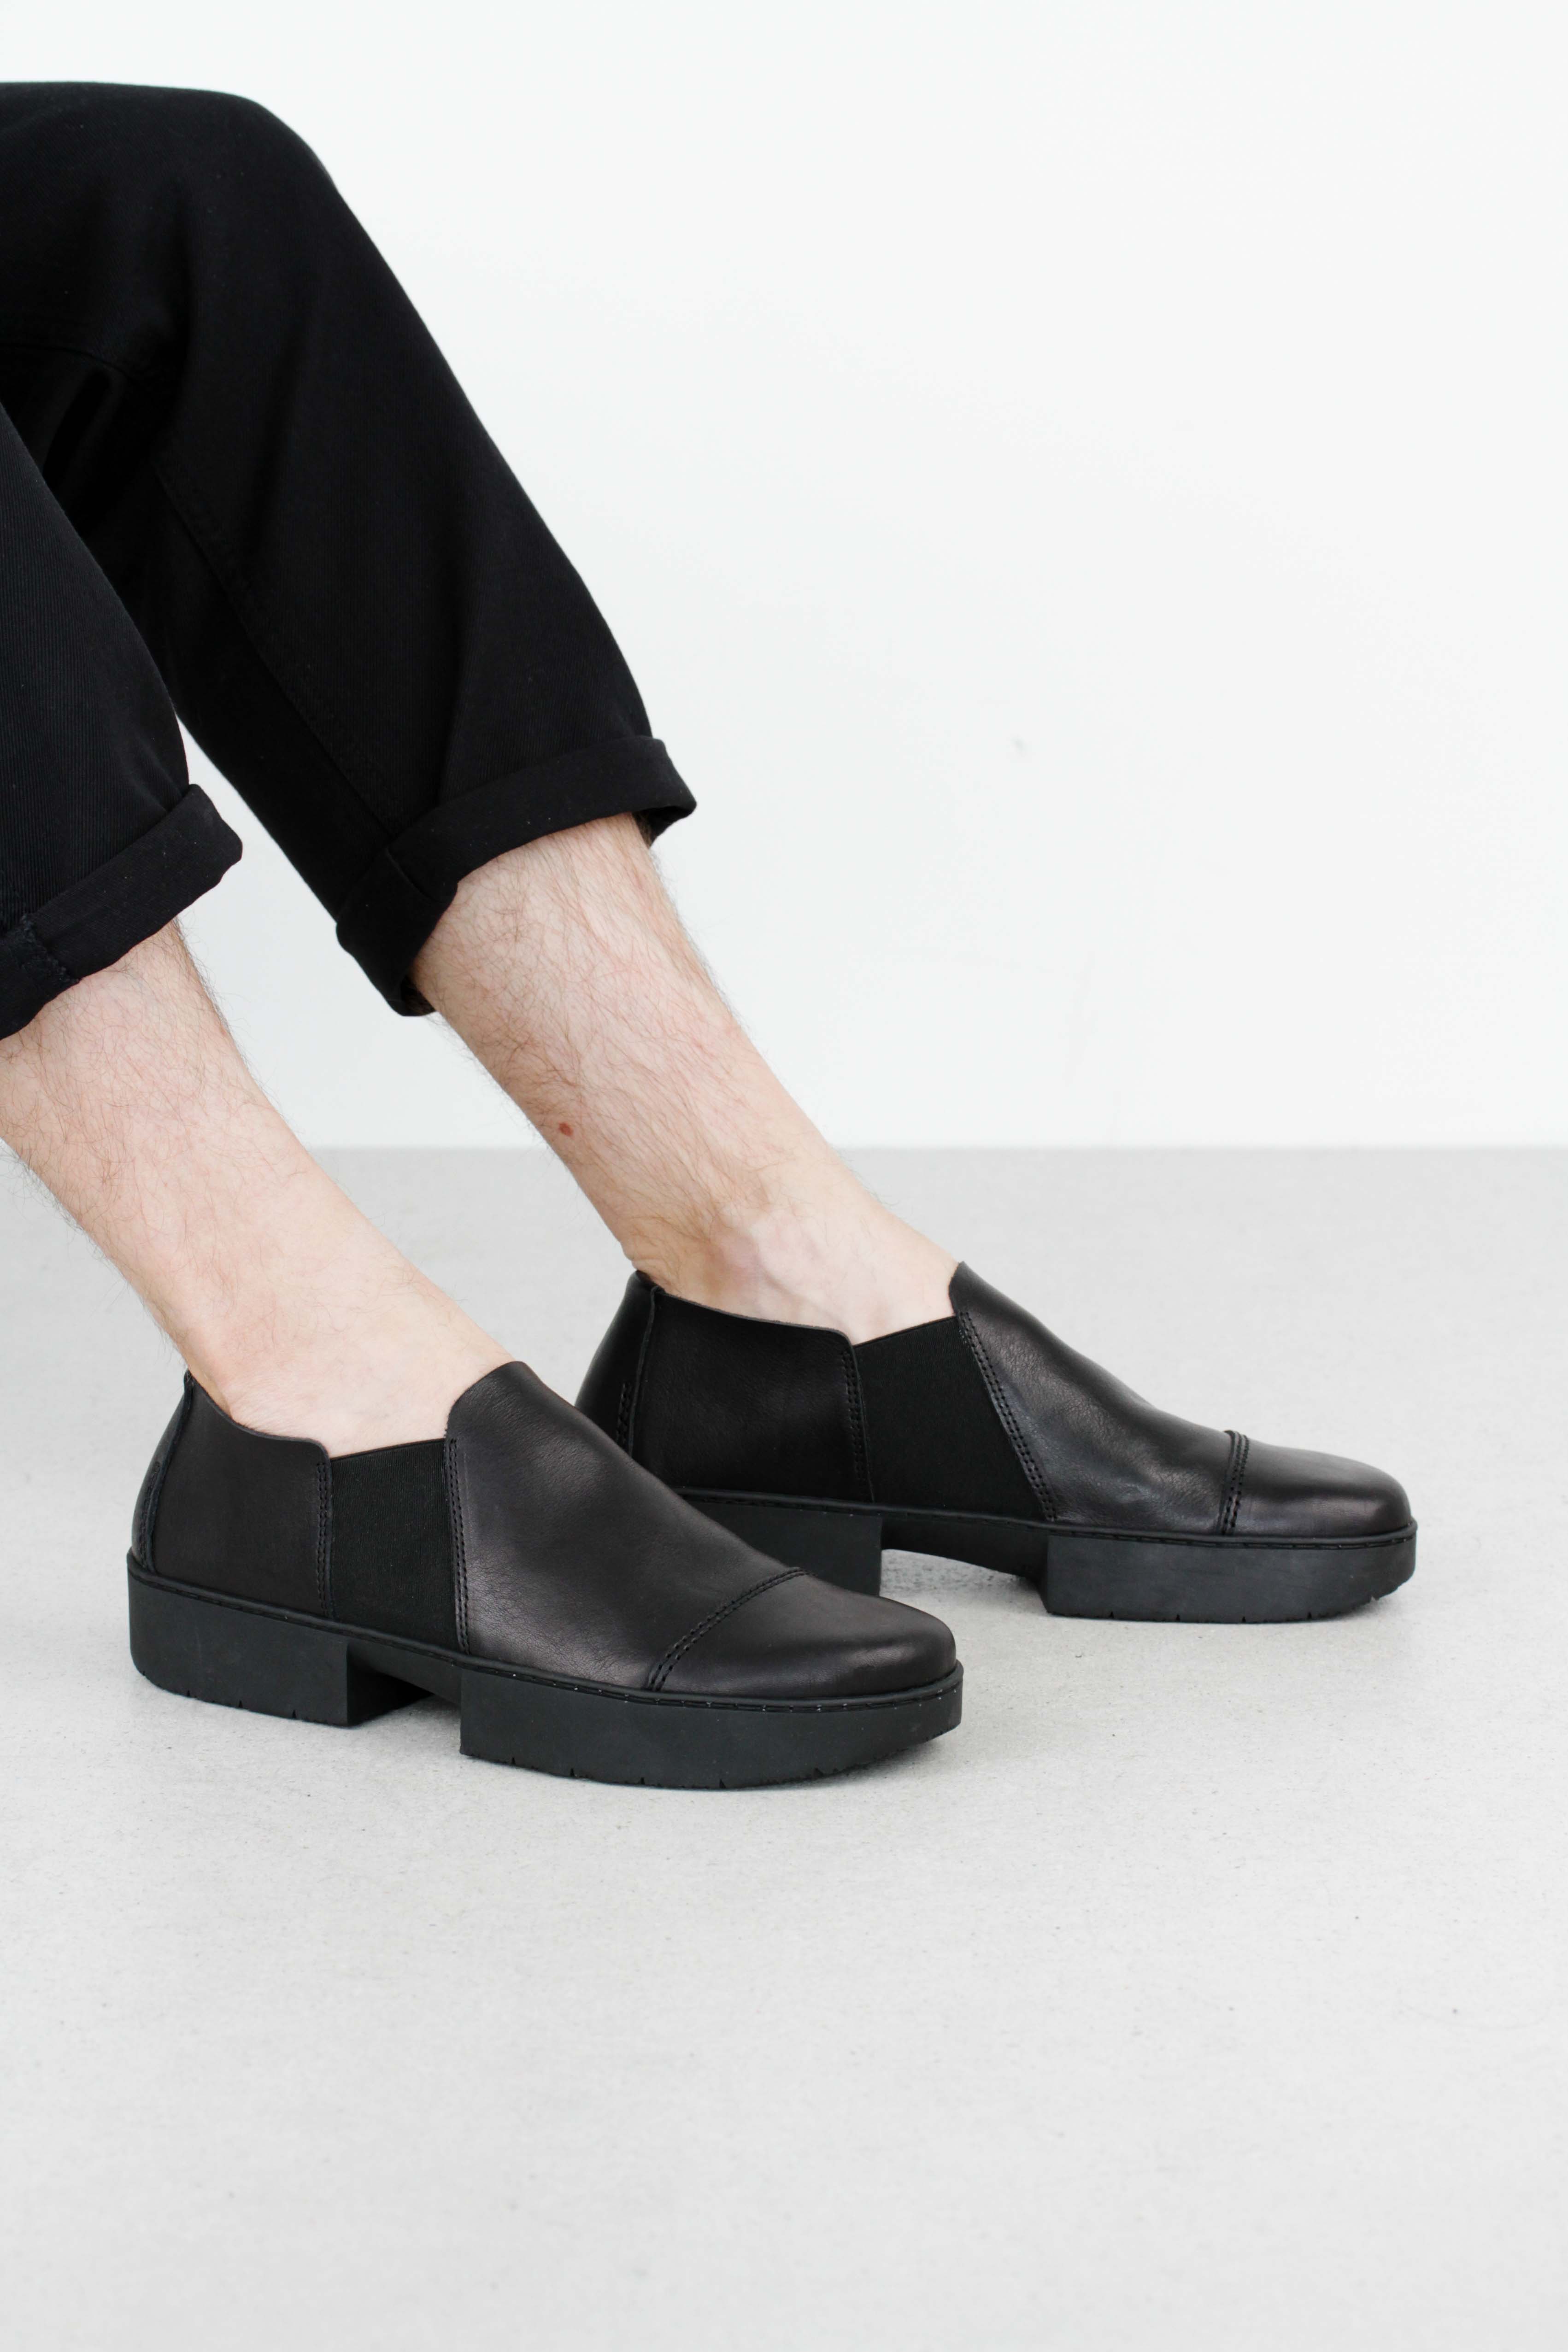 Lazy m - Trippen shoes - exceptional design and quality from Germany